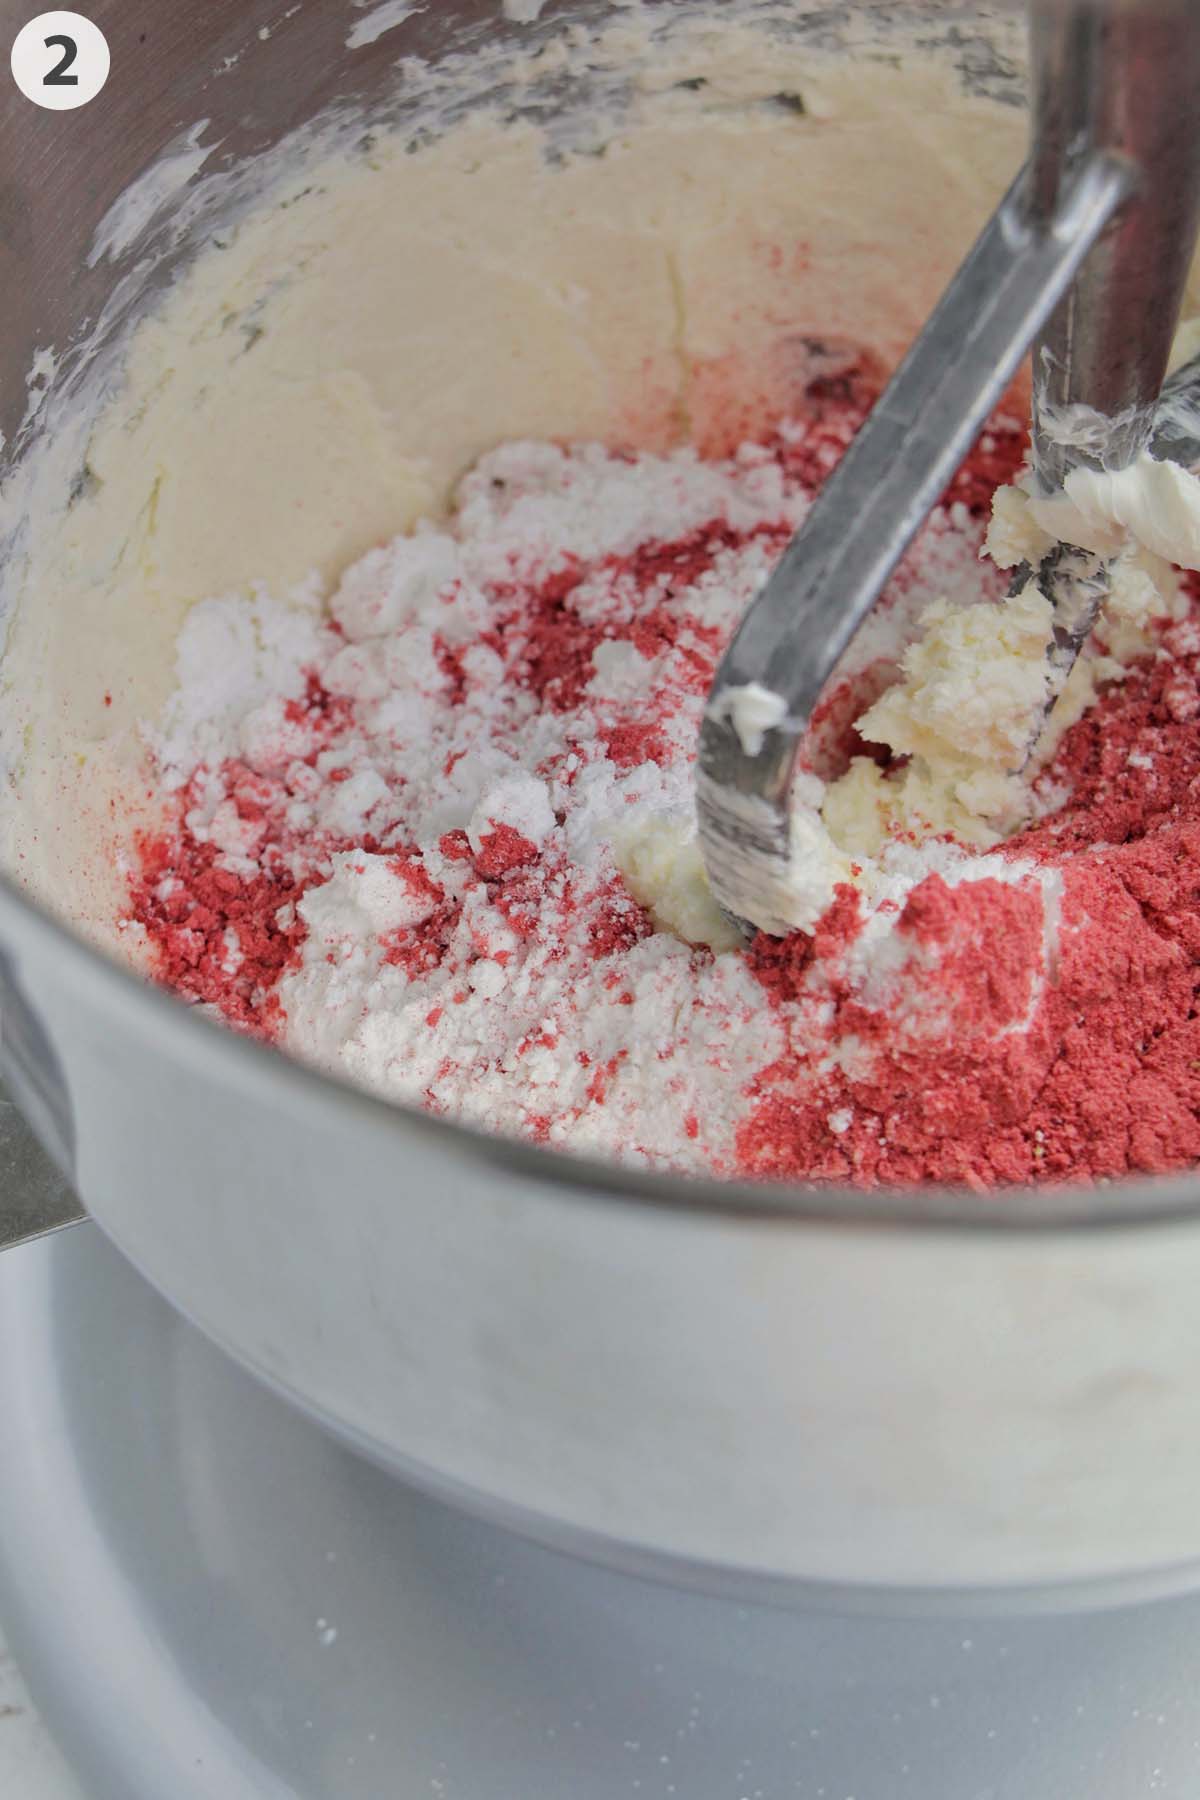 numbered photo showing confectioners' sugar and freeze dried strawberries mixing with butter.